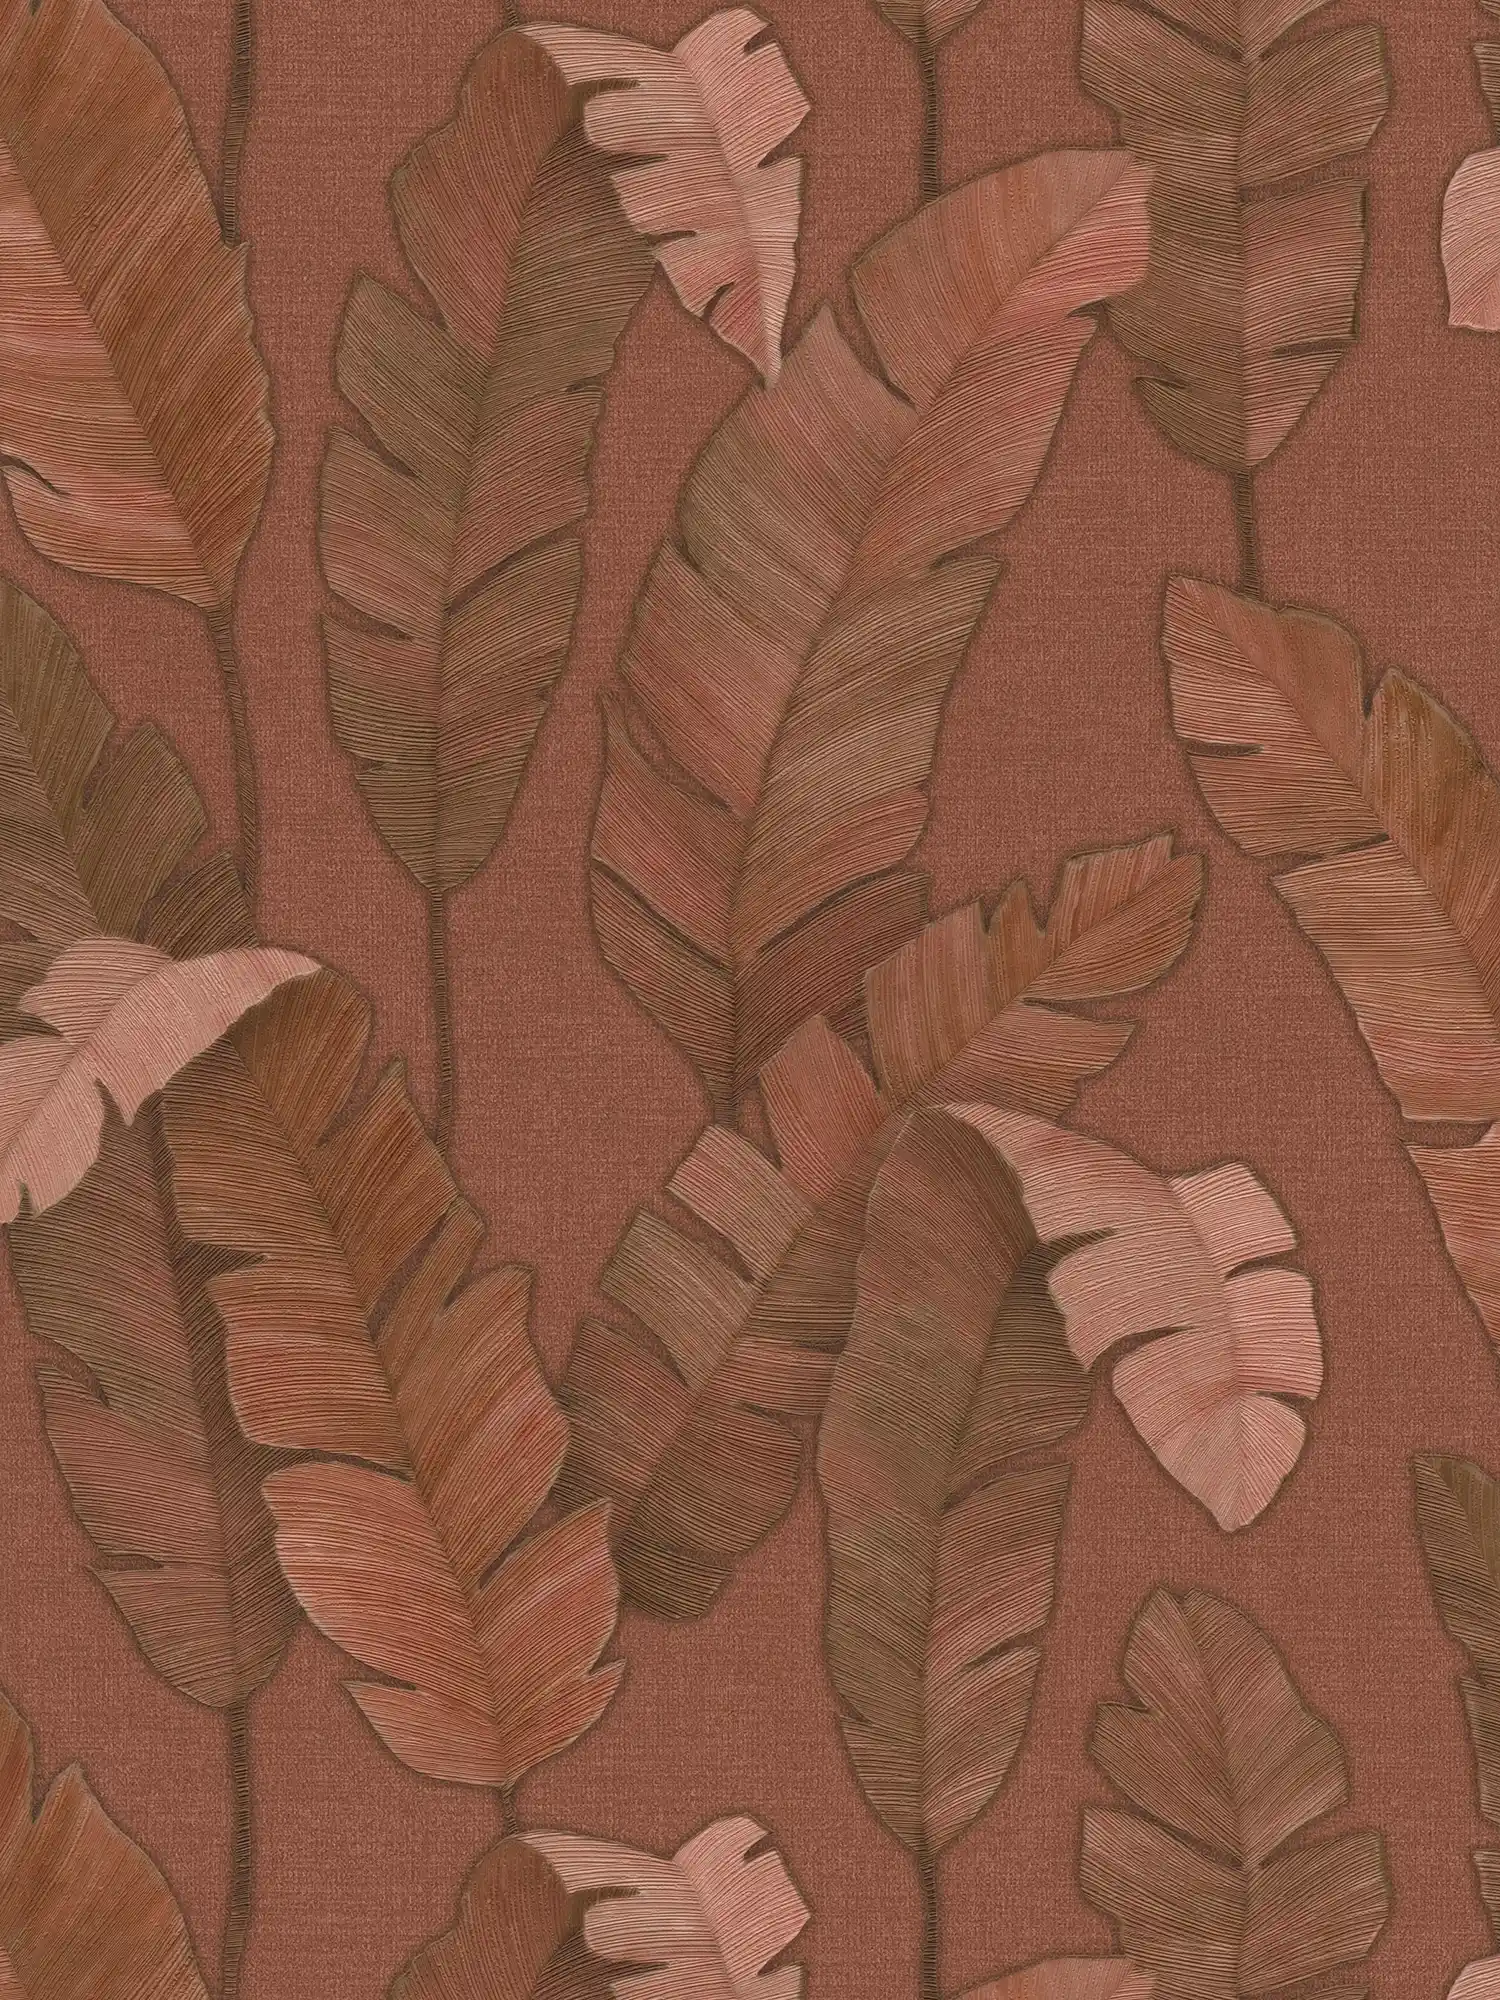 Tropical non-woven wallpaper with large palm leaves - reddish brown
